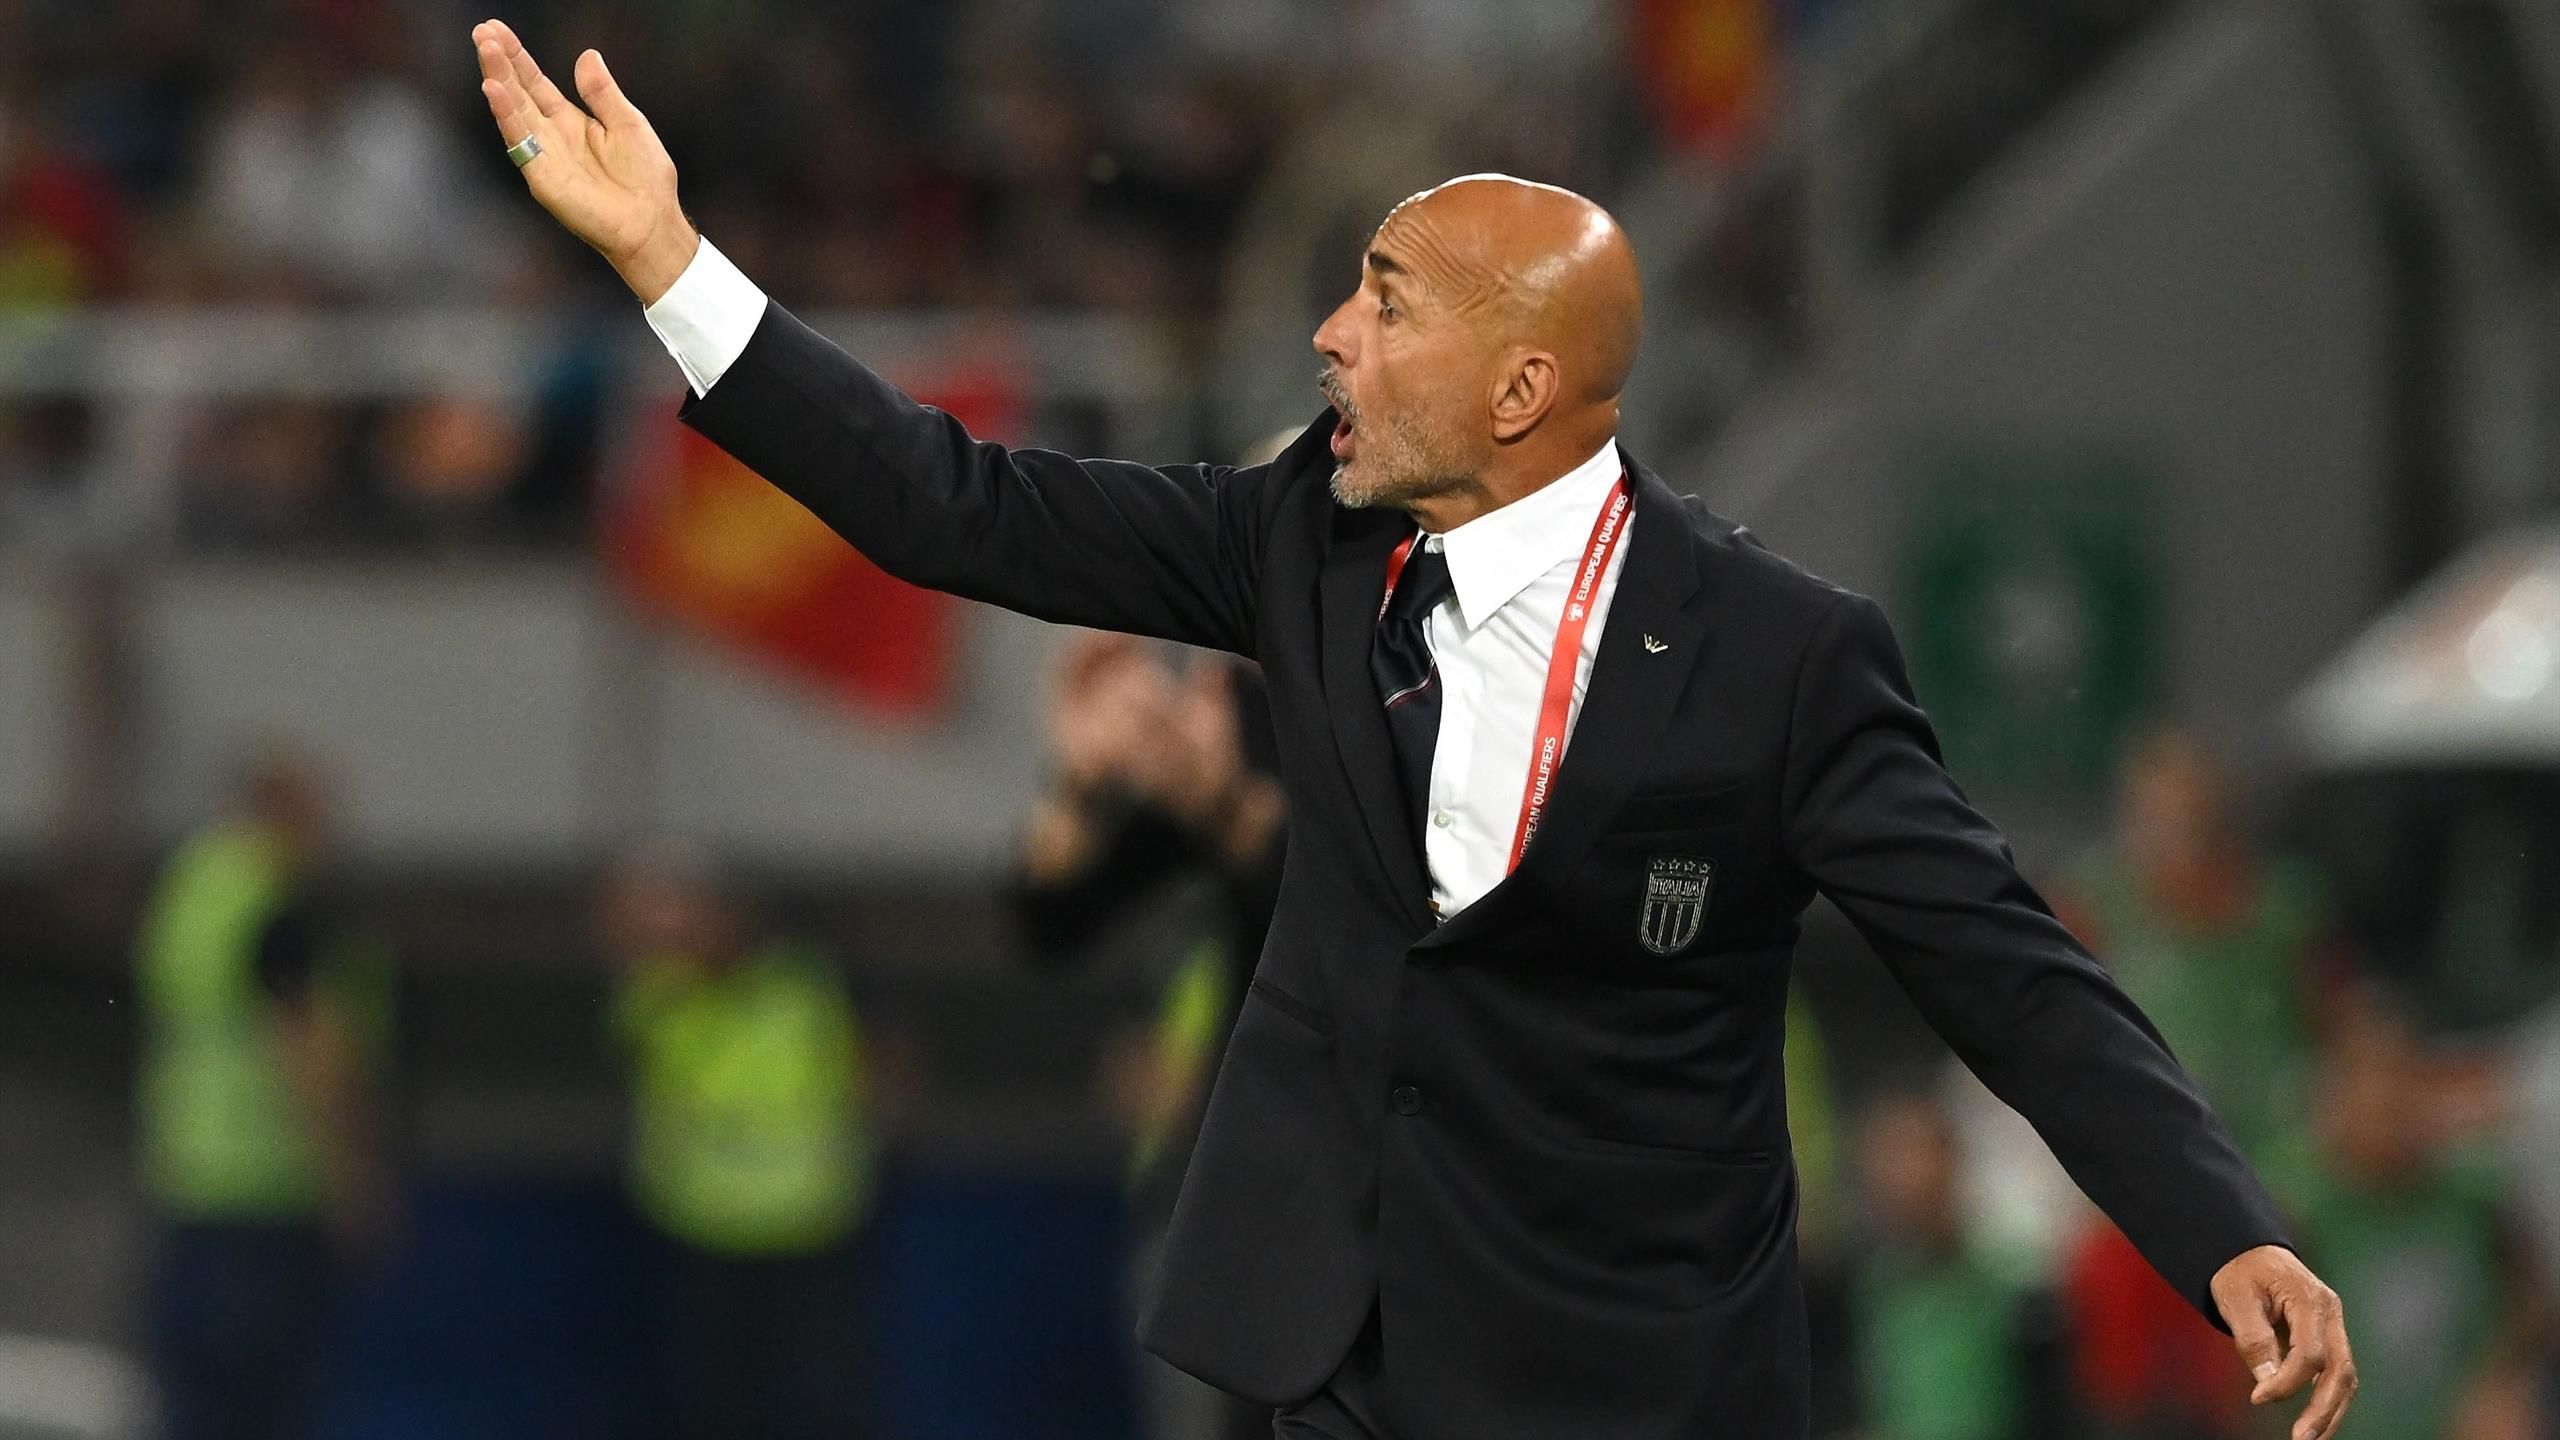 Italy fails in Luciano Spalletti’s first match against North Macedonia: European Championship qualifiers are on the brink